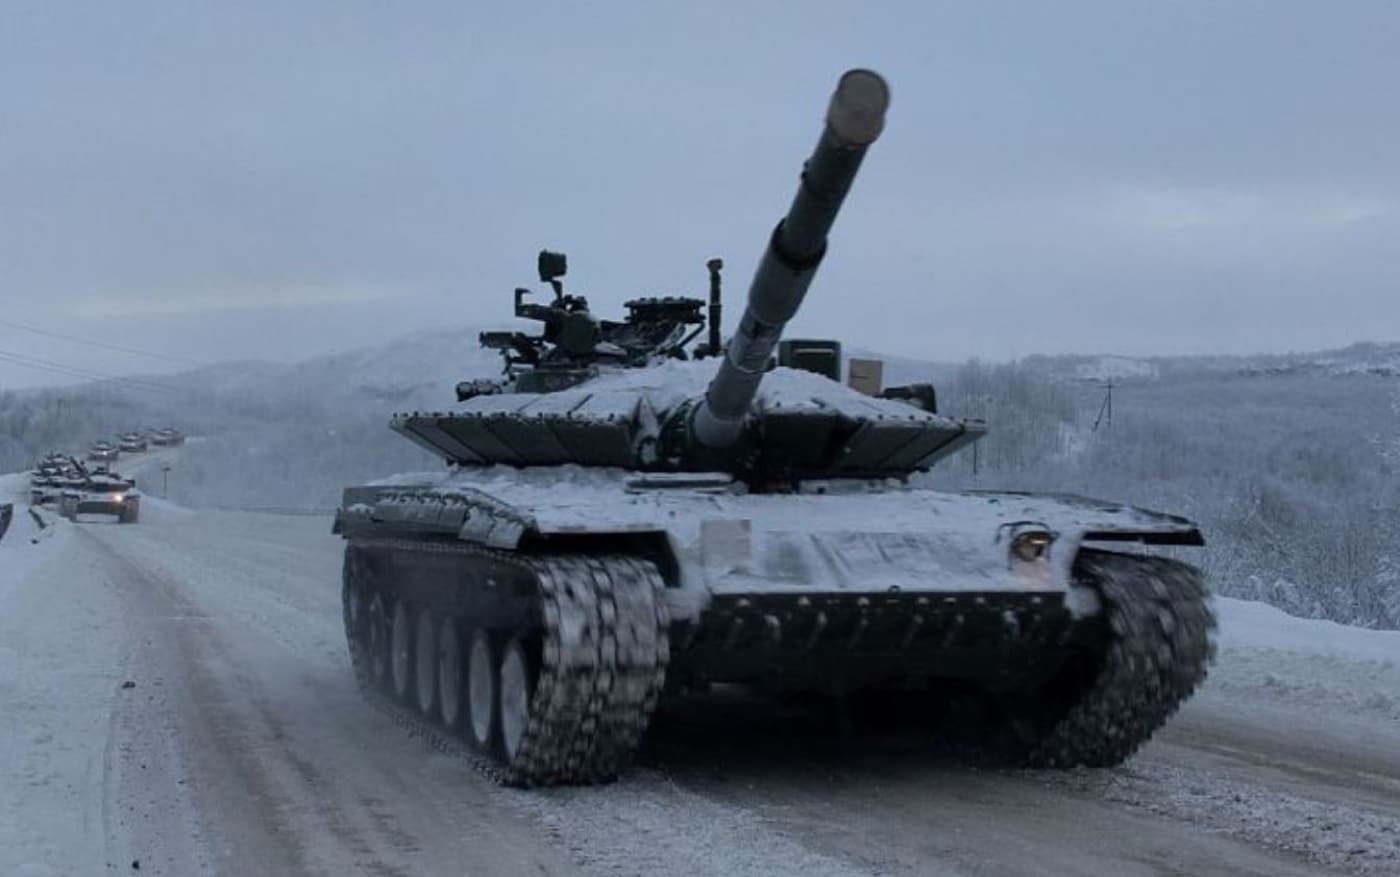 t-80 bvm tank in the arctic circle